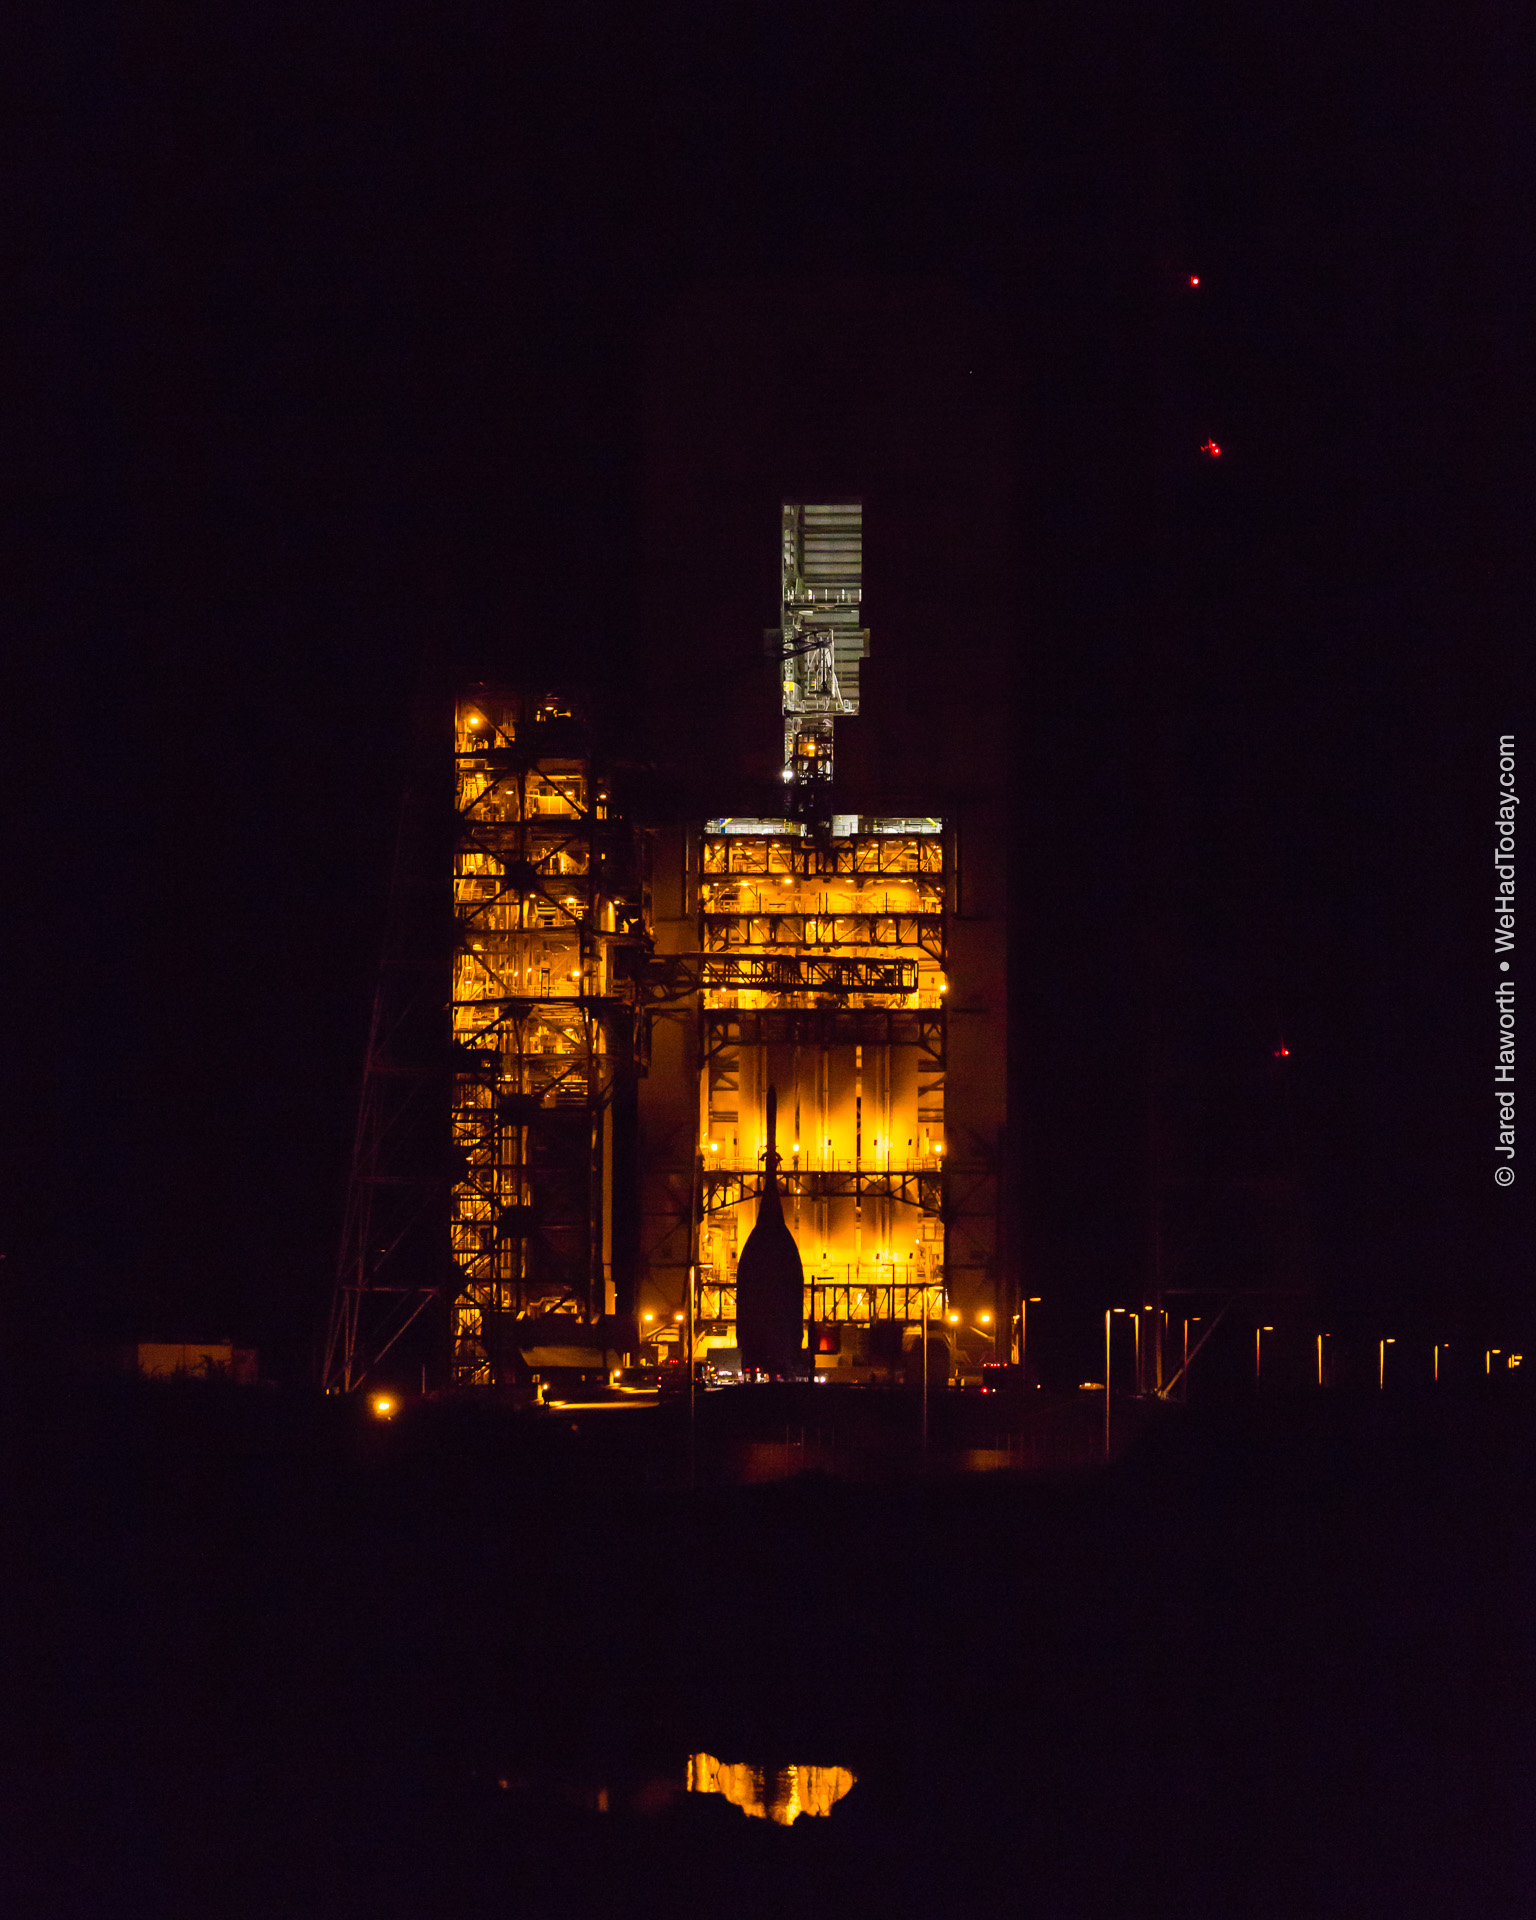 The Orion spacecraft arrives at Space Launch Complex 37B, and is seen in silhouette against the Delta IV Heavy launch vehicle within the mobile service tower.